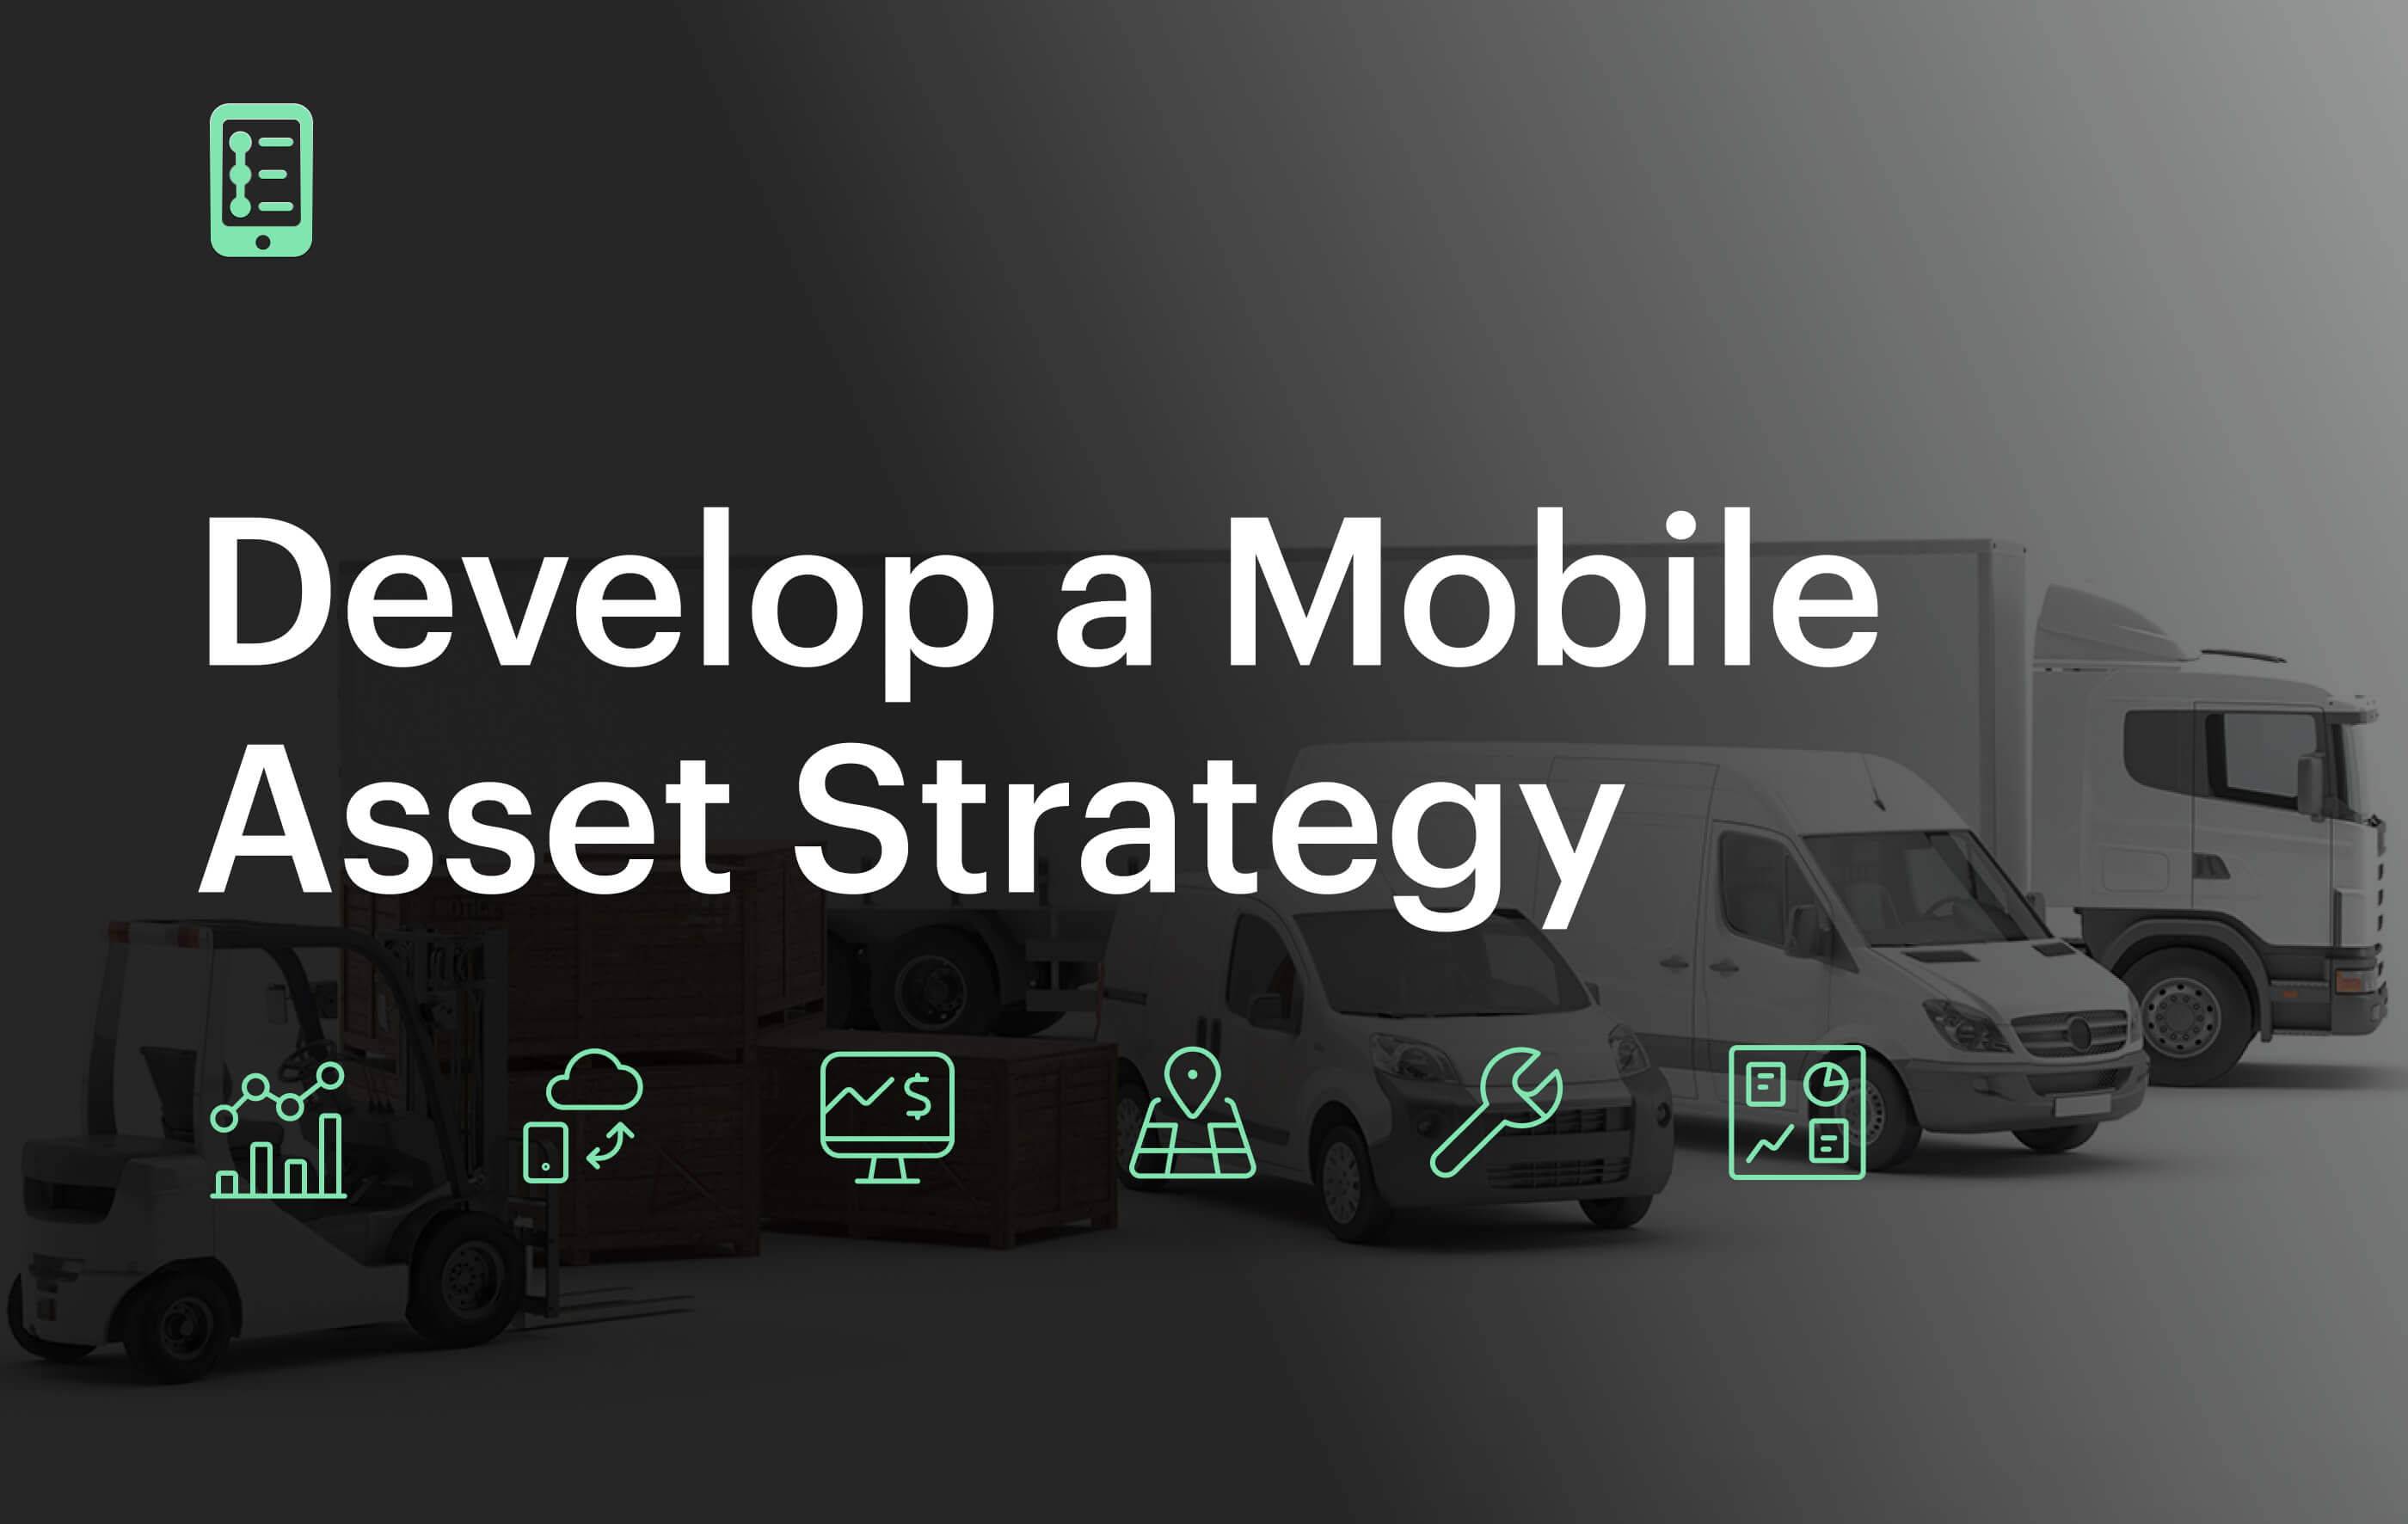 Mobile asset strategy